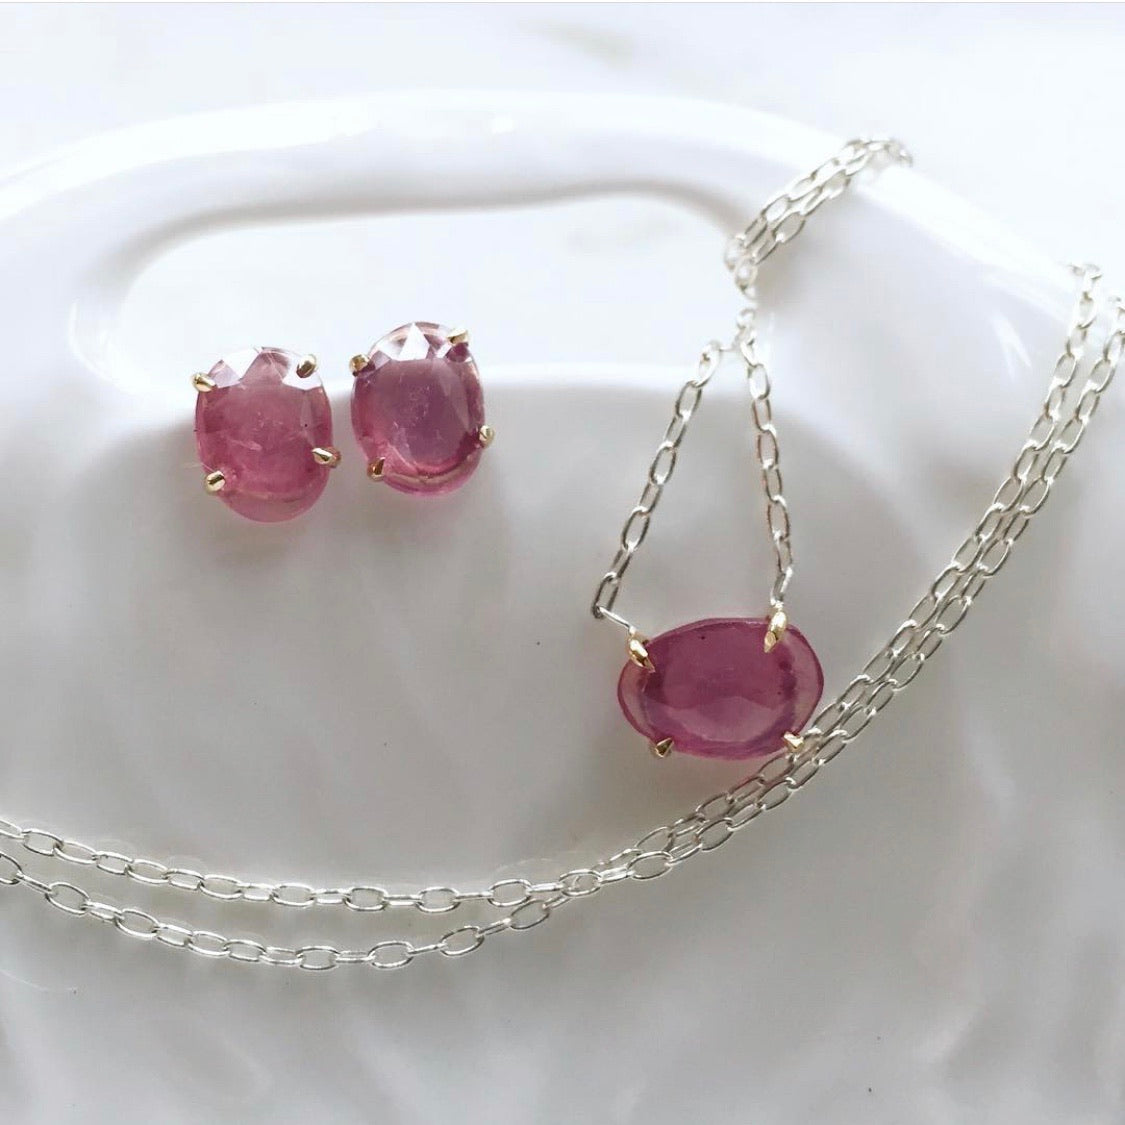 pink sapphire necklace with 14k gold prongs + sterling silver chain